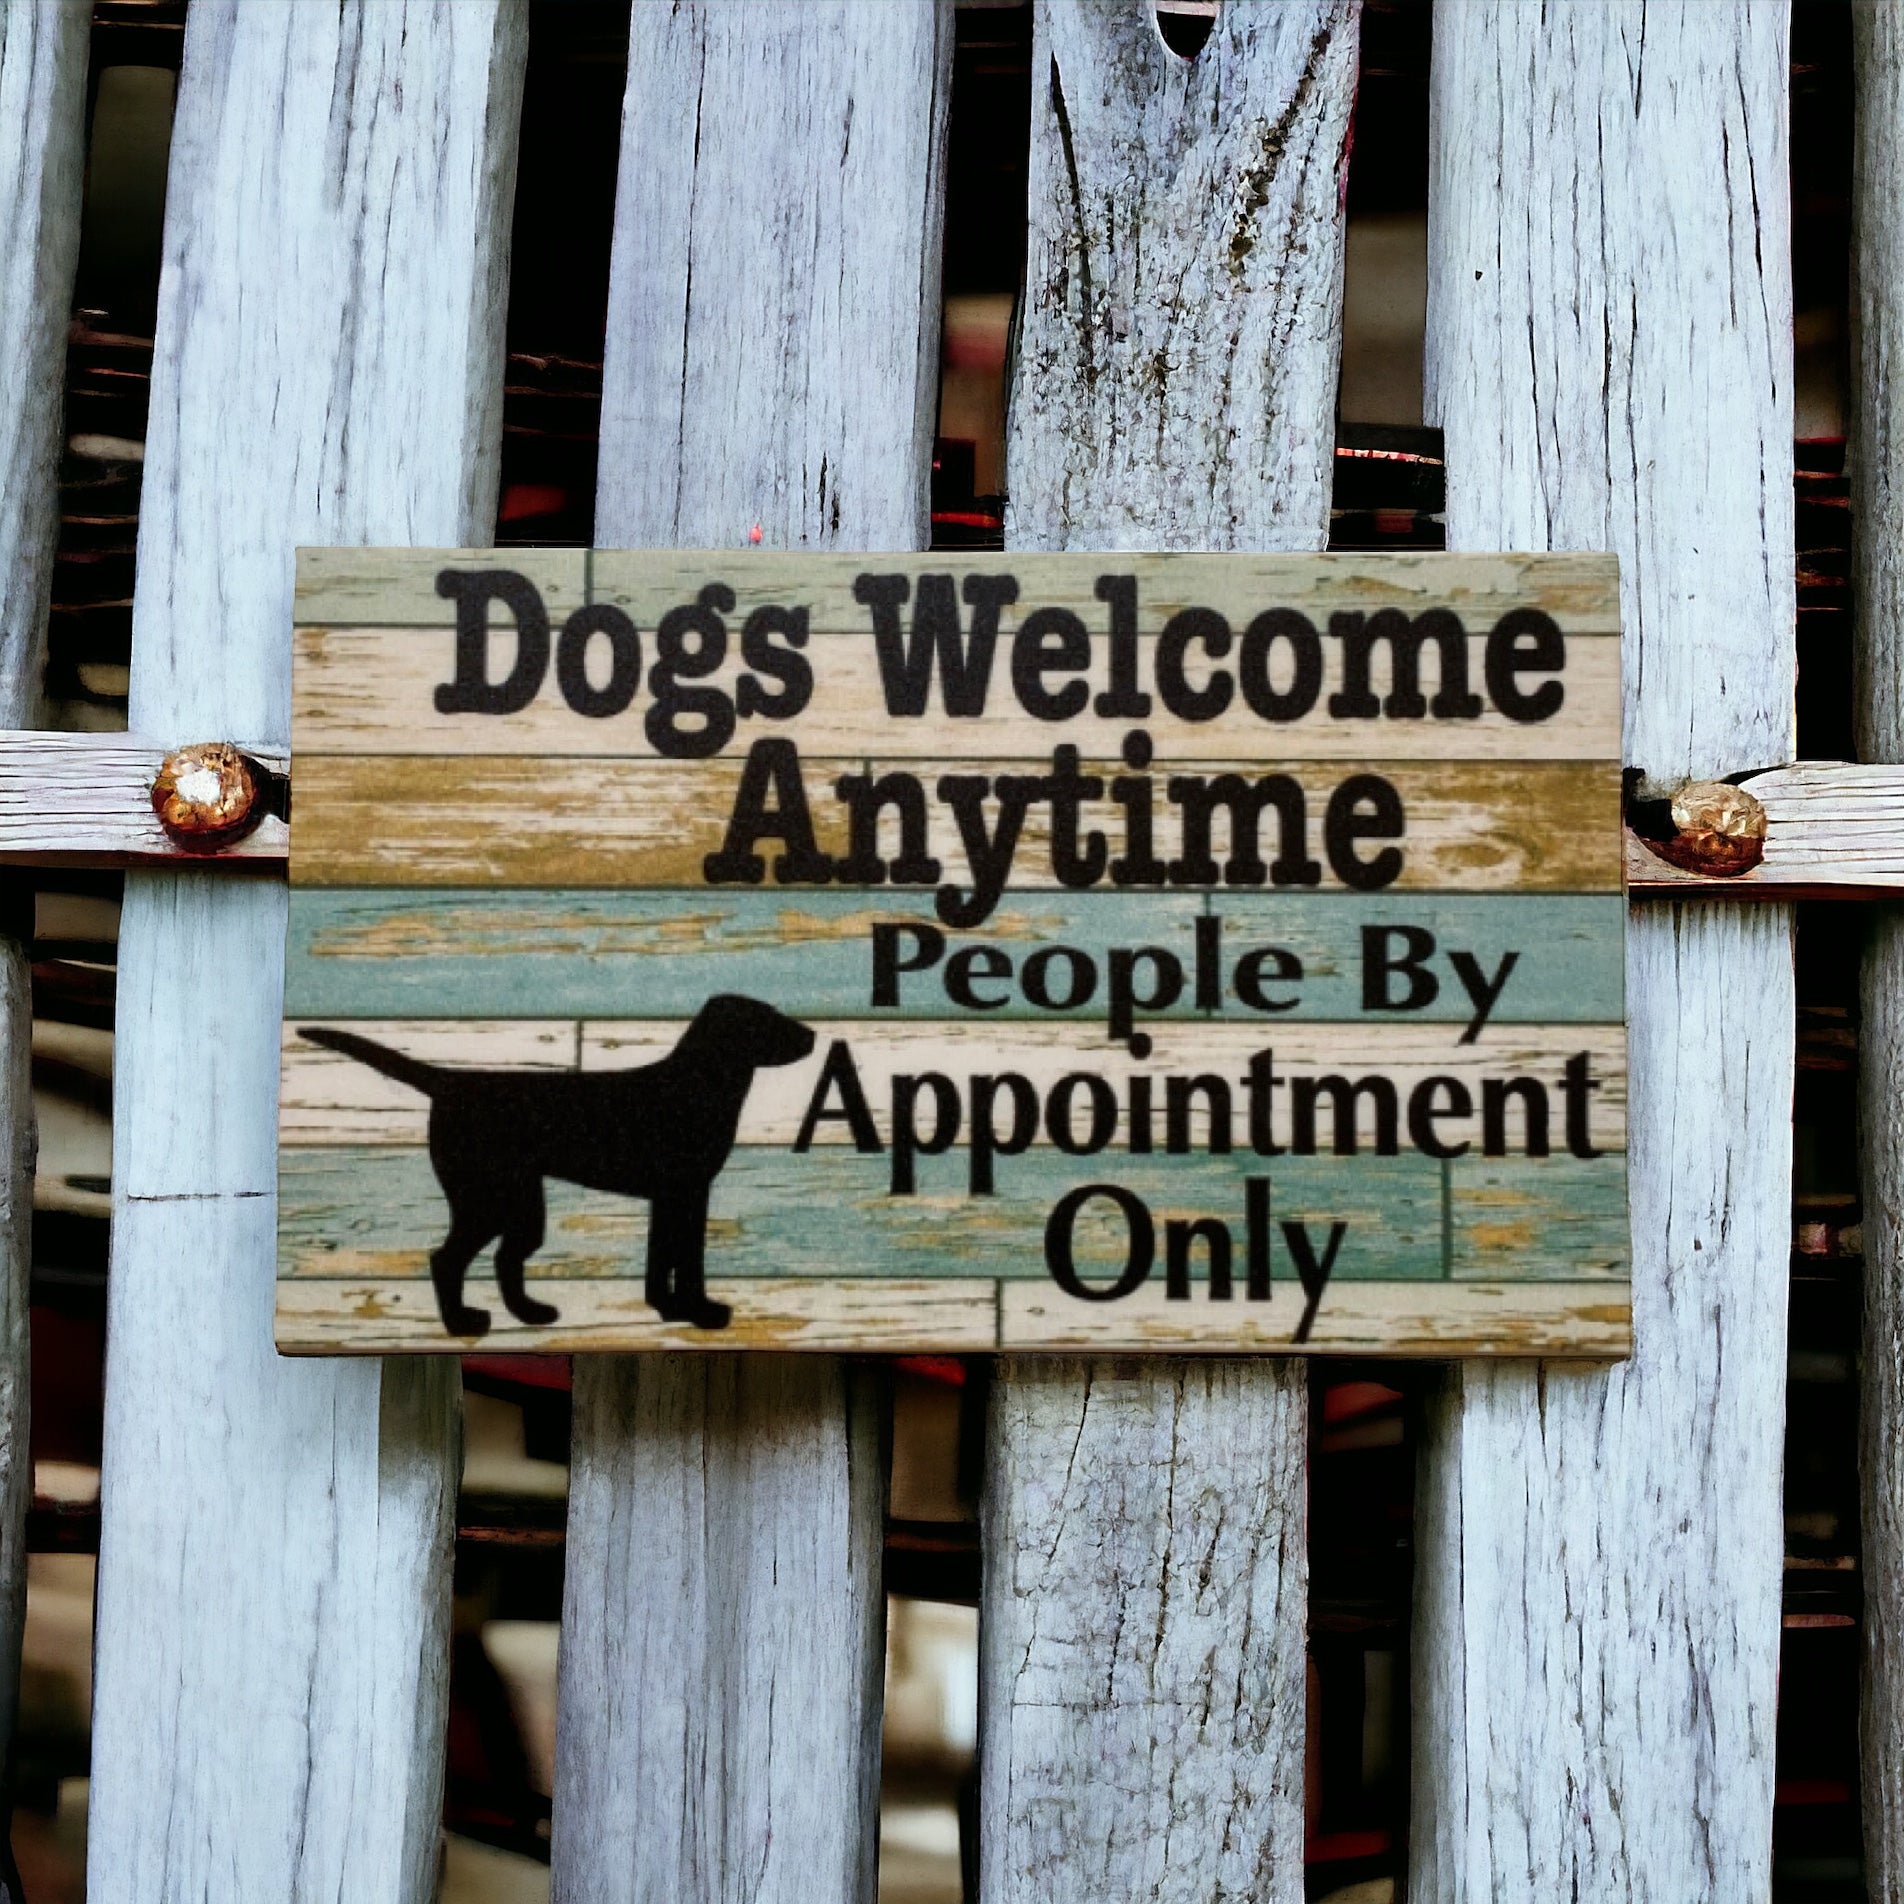 Dogs Welcome People By Appointment Sign - The Renmy Store Homewares & Gifts 